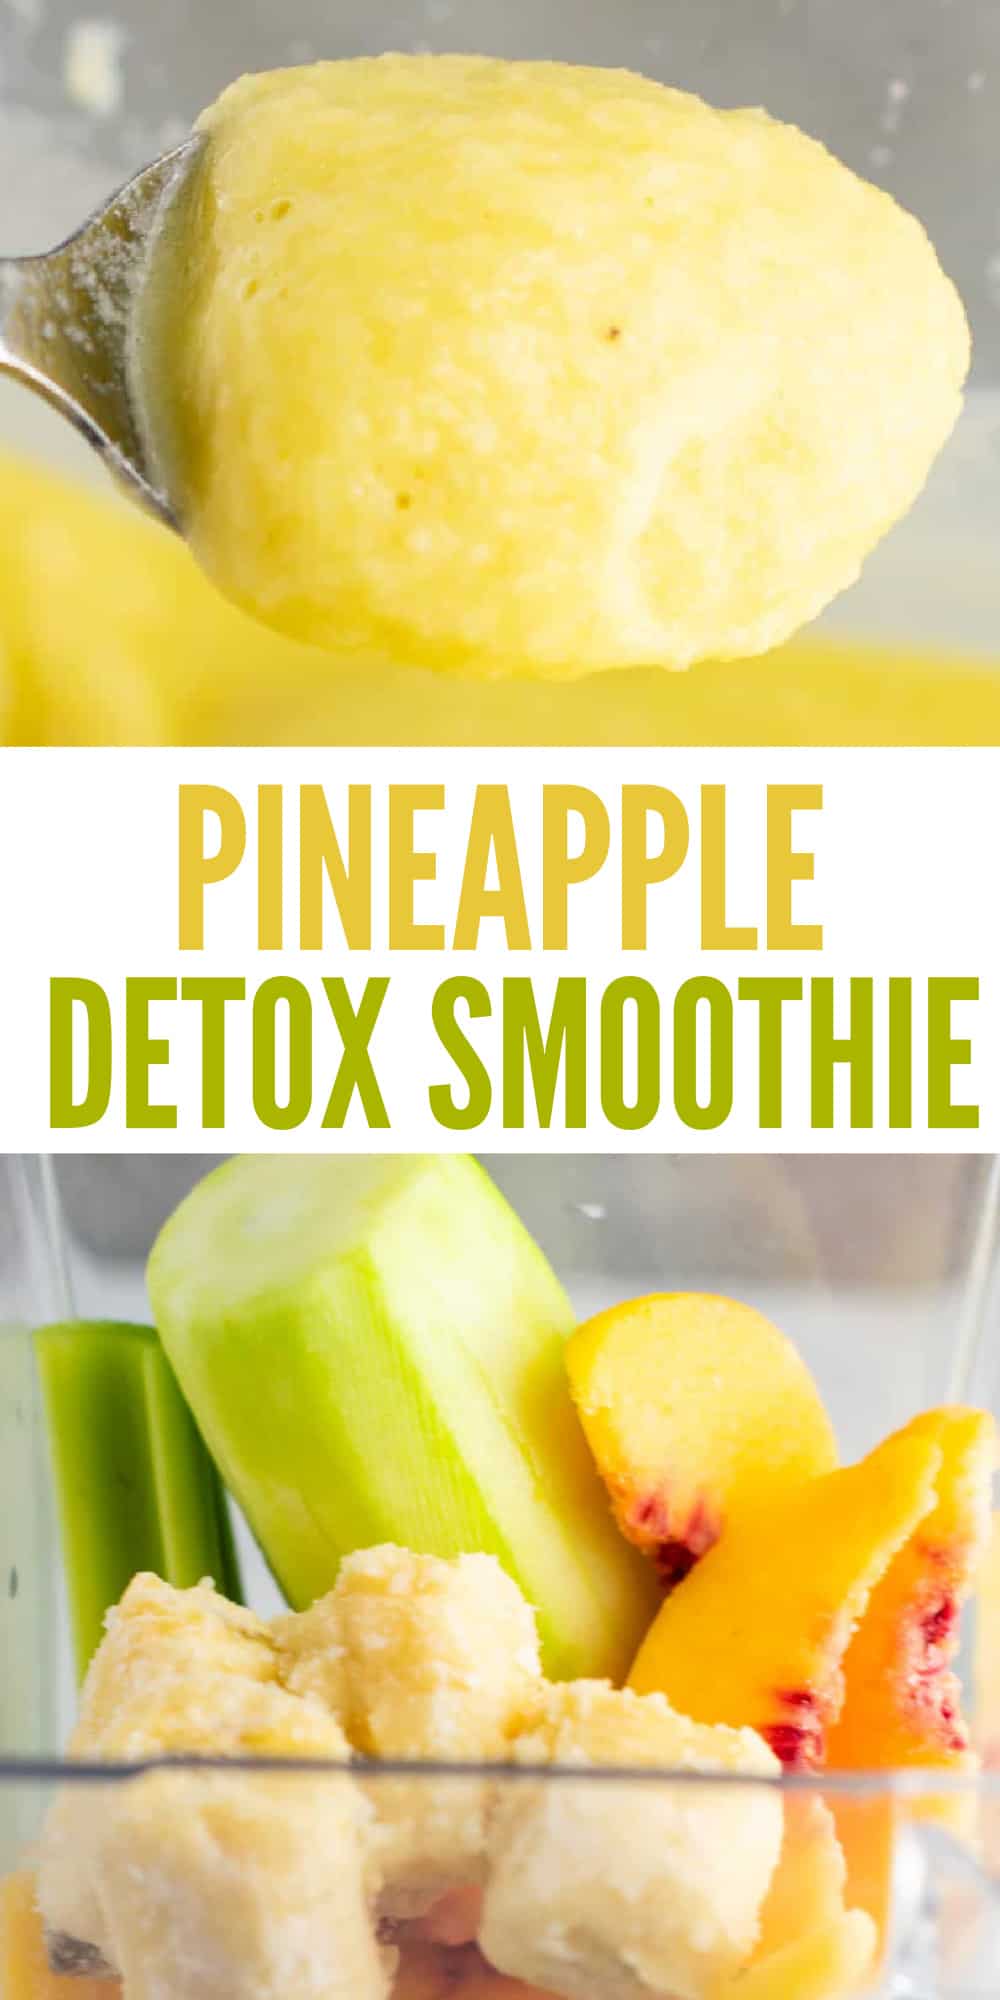 image with text "pineapple detox smoothie"